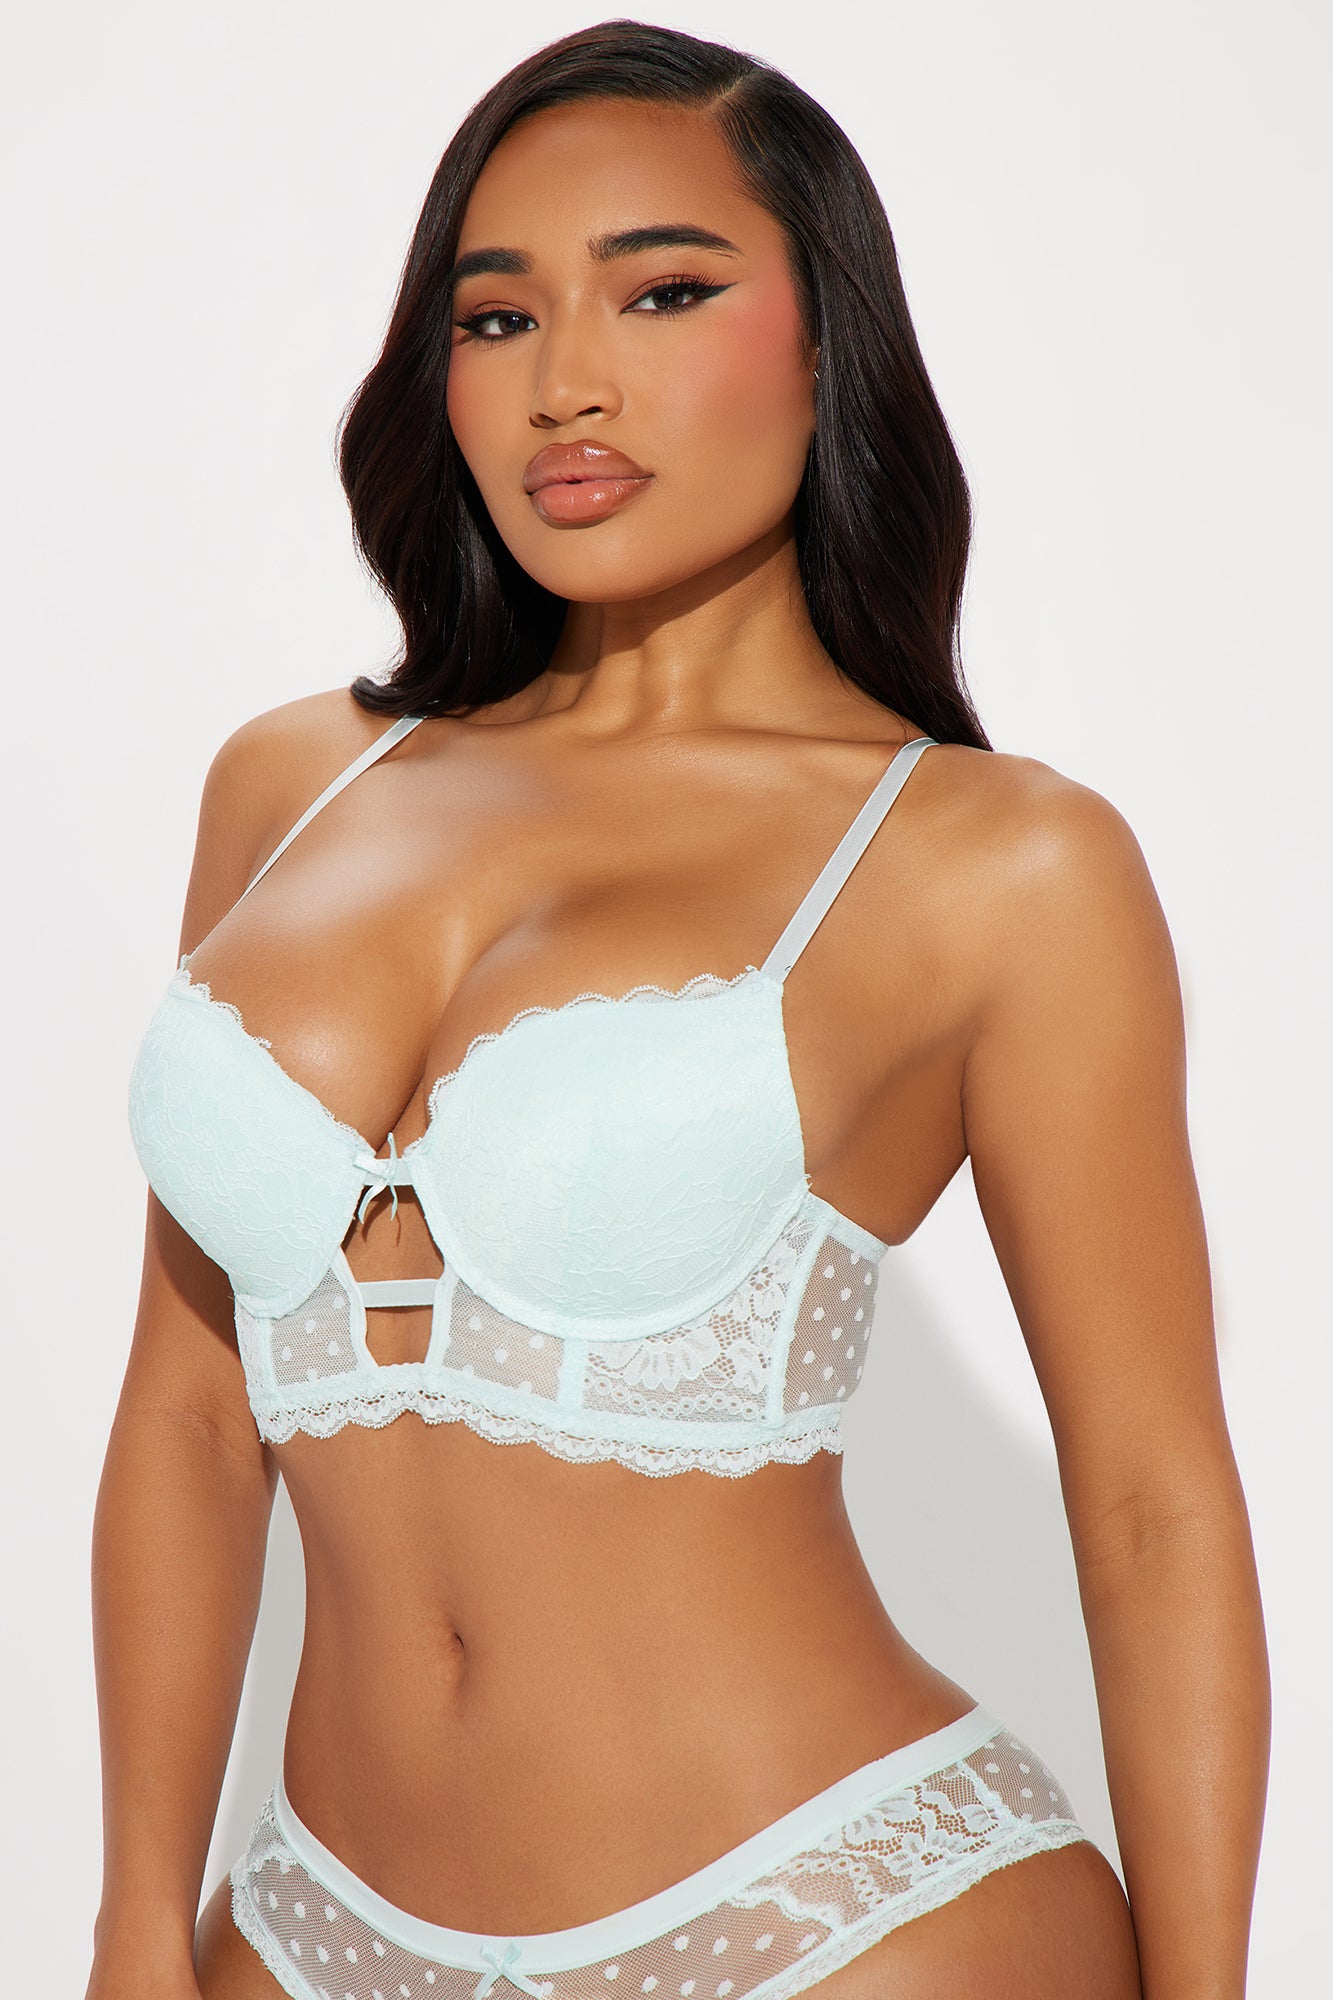 Clovia - Lace love! Bras and bralettes crafted with exquisite lace for that  classy and elegant feeling underneath. Shop 2 Plush Bras for Rs.999  #underfashion Shop now